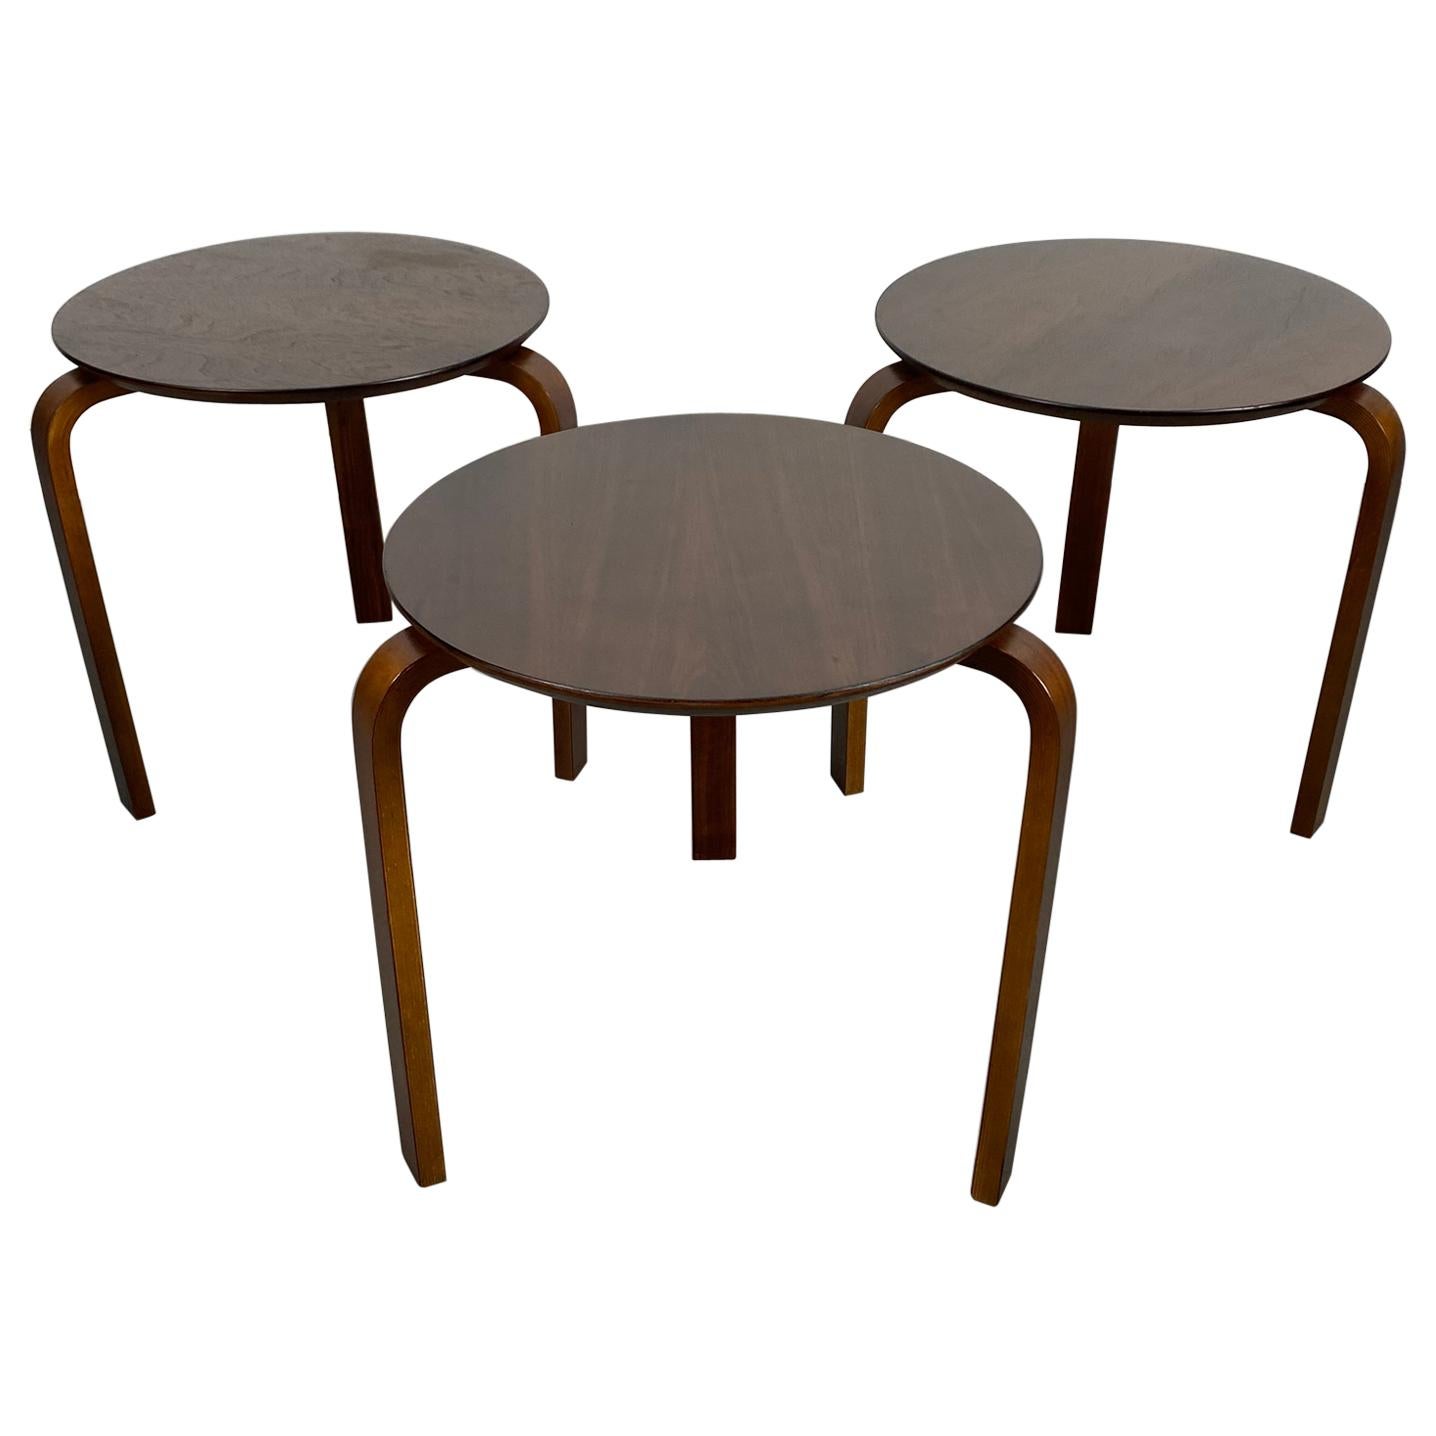 Set of 3, Classic Bentwood Tables, Modernist, Made in Denmark